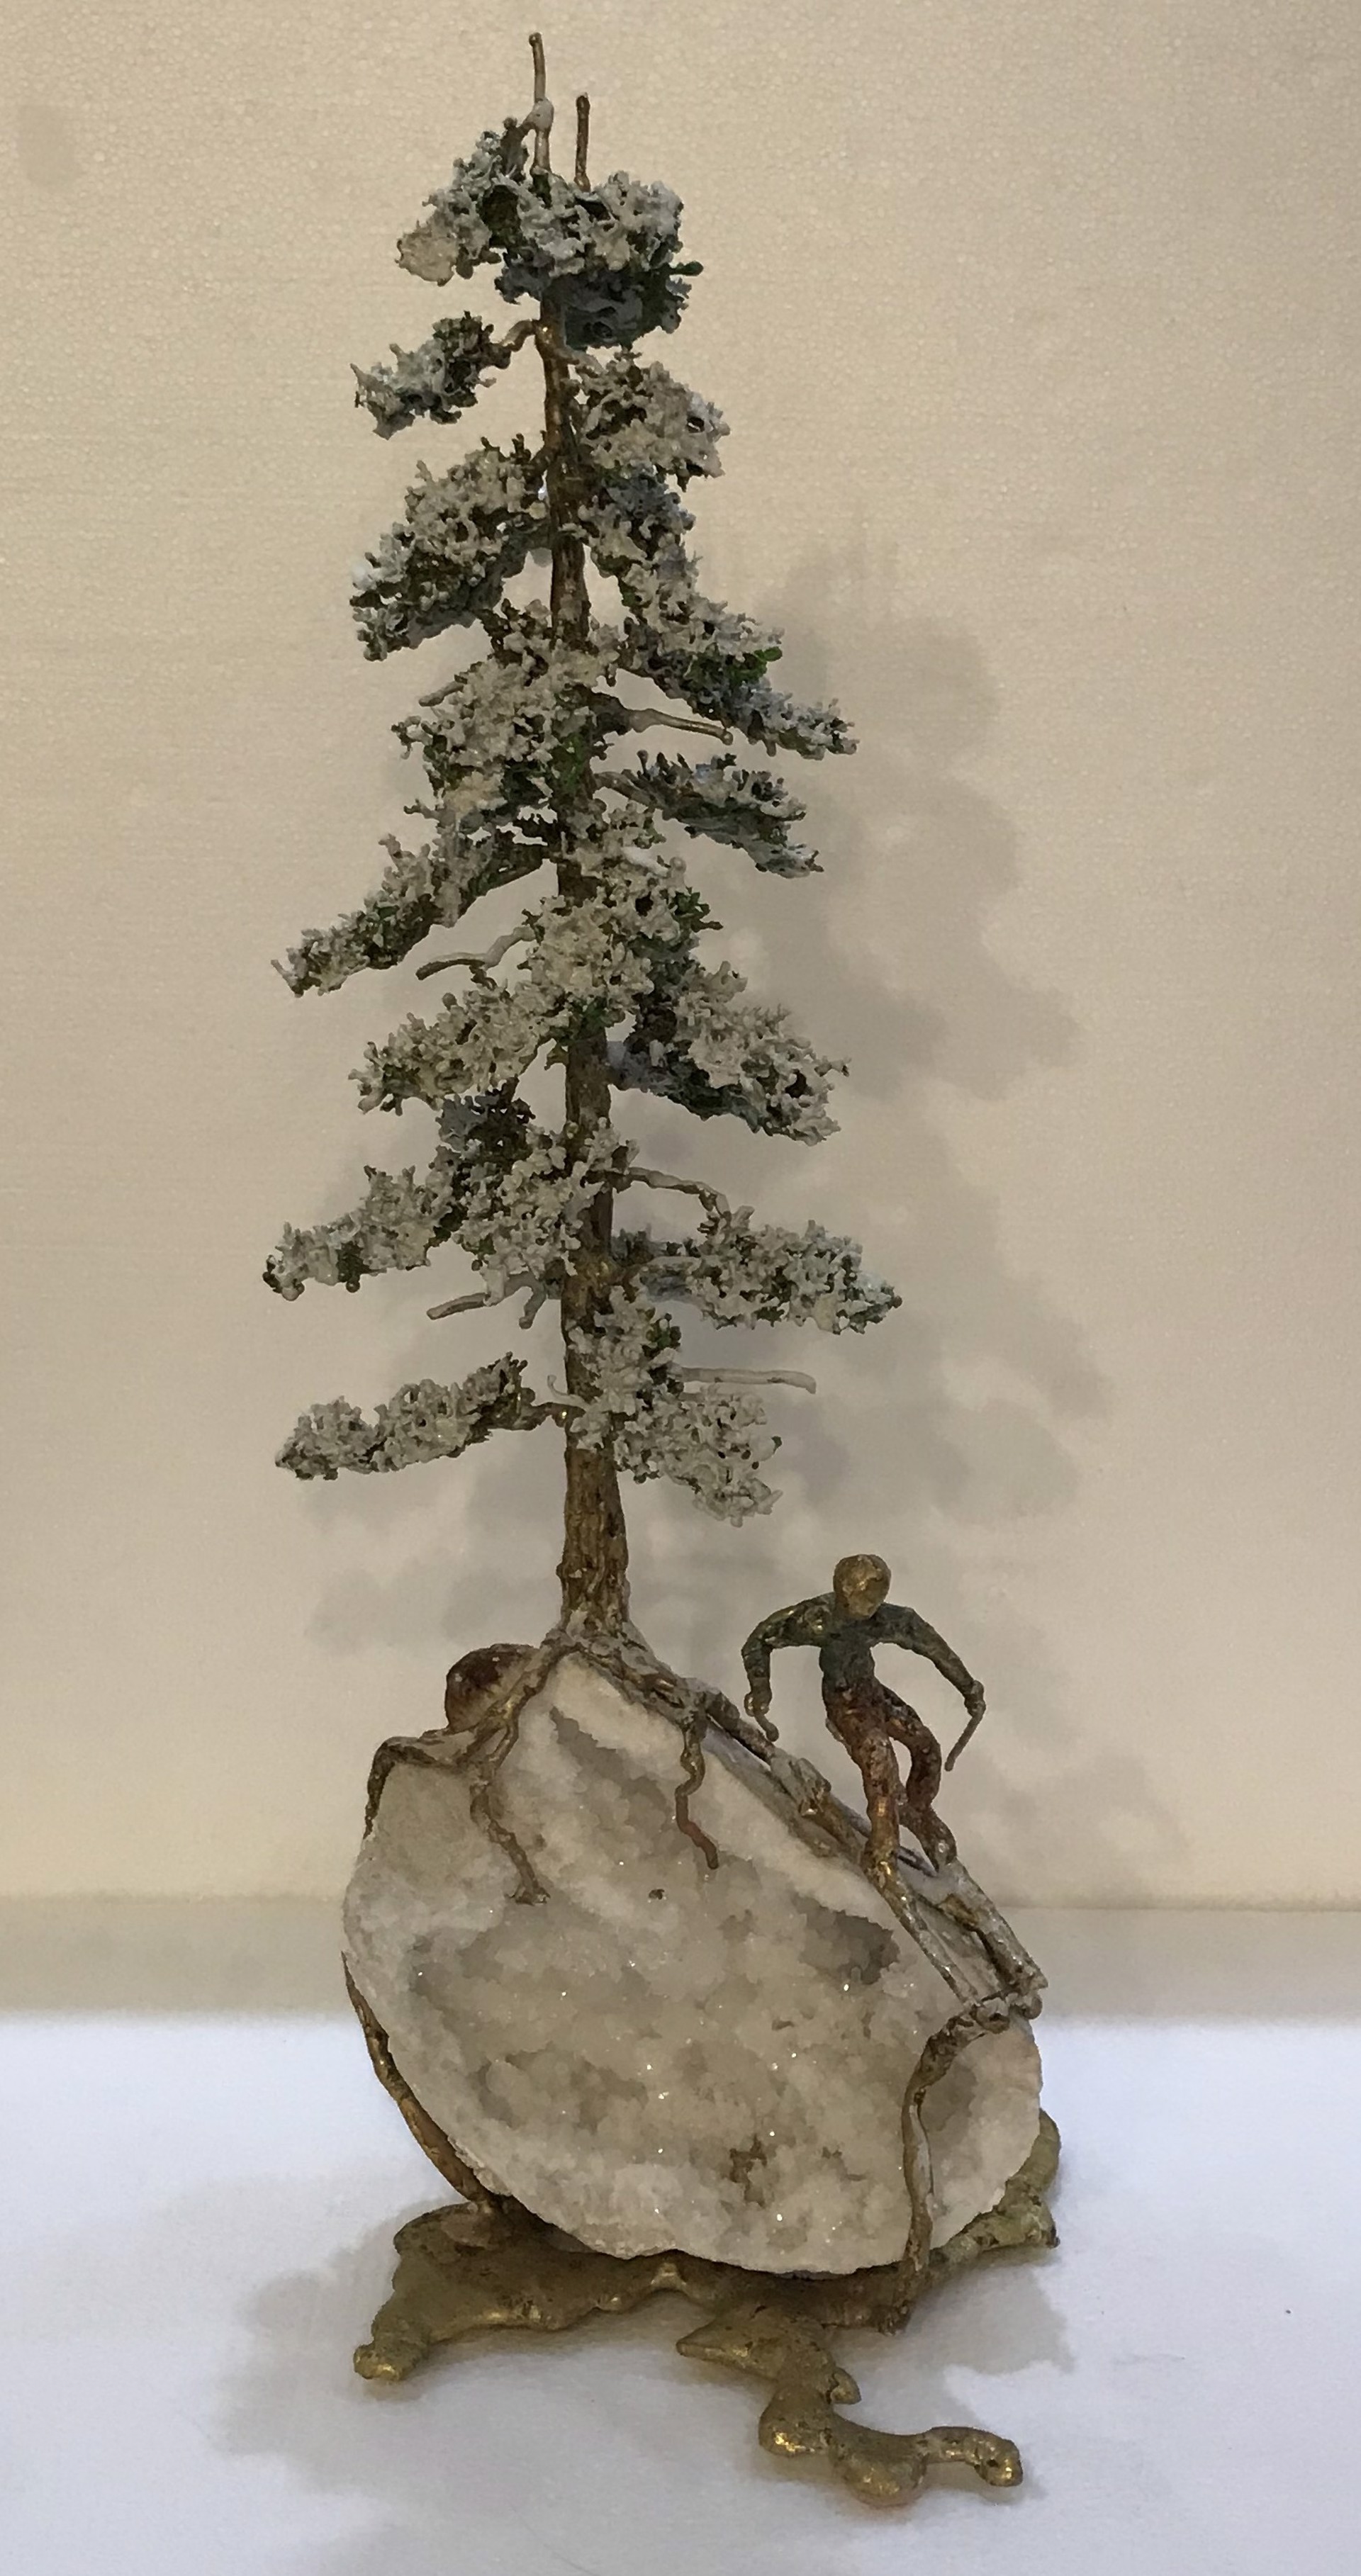 Snowy Pine on Geode with Skier (large) by Richard & Blanca Smith